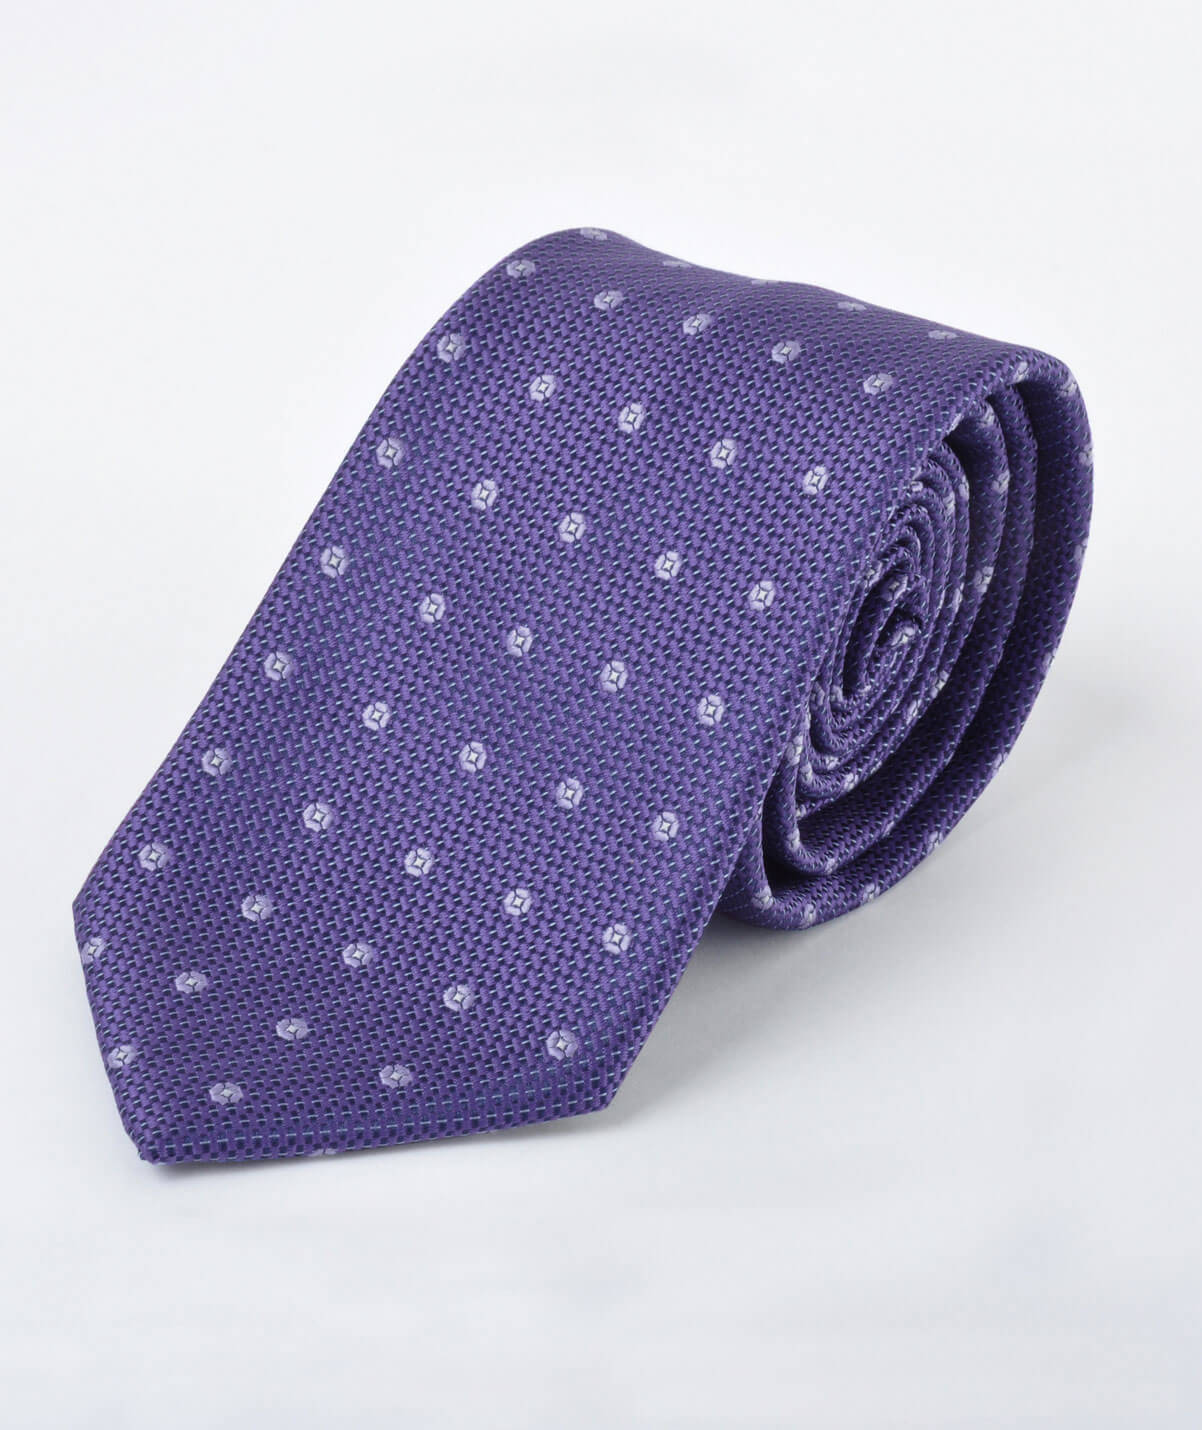 Dot Tie - Armstrong Aviation Clothing